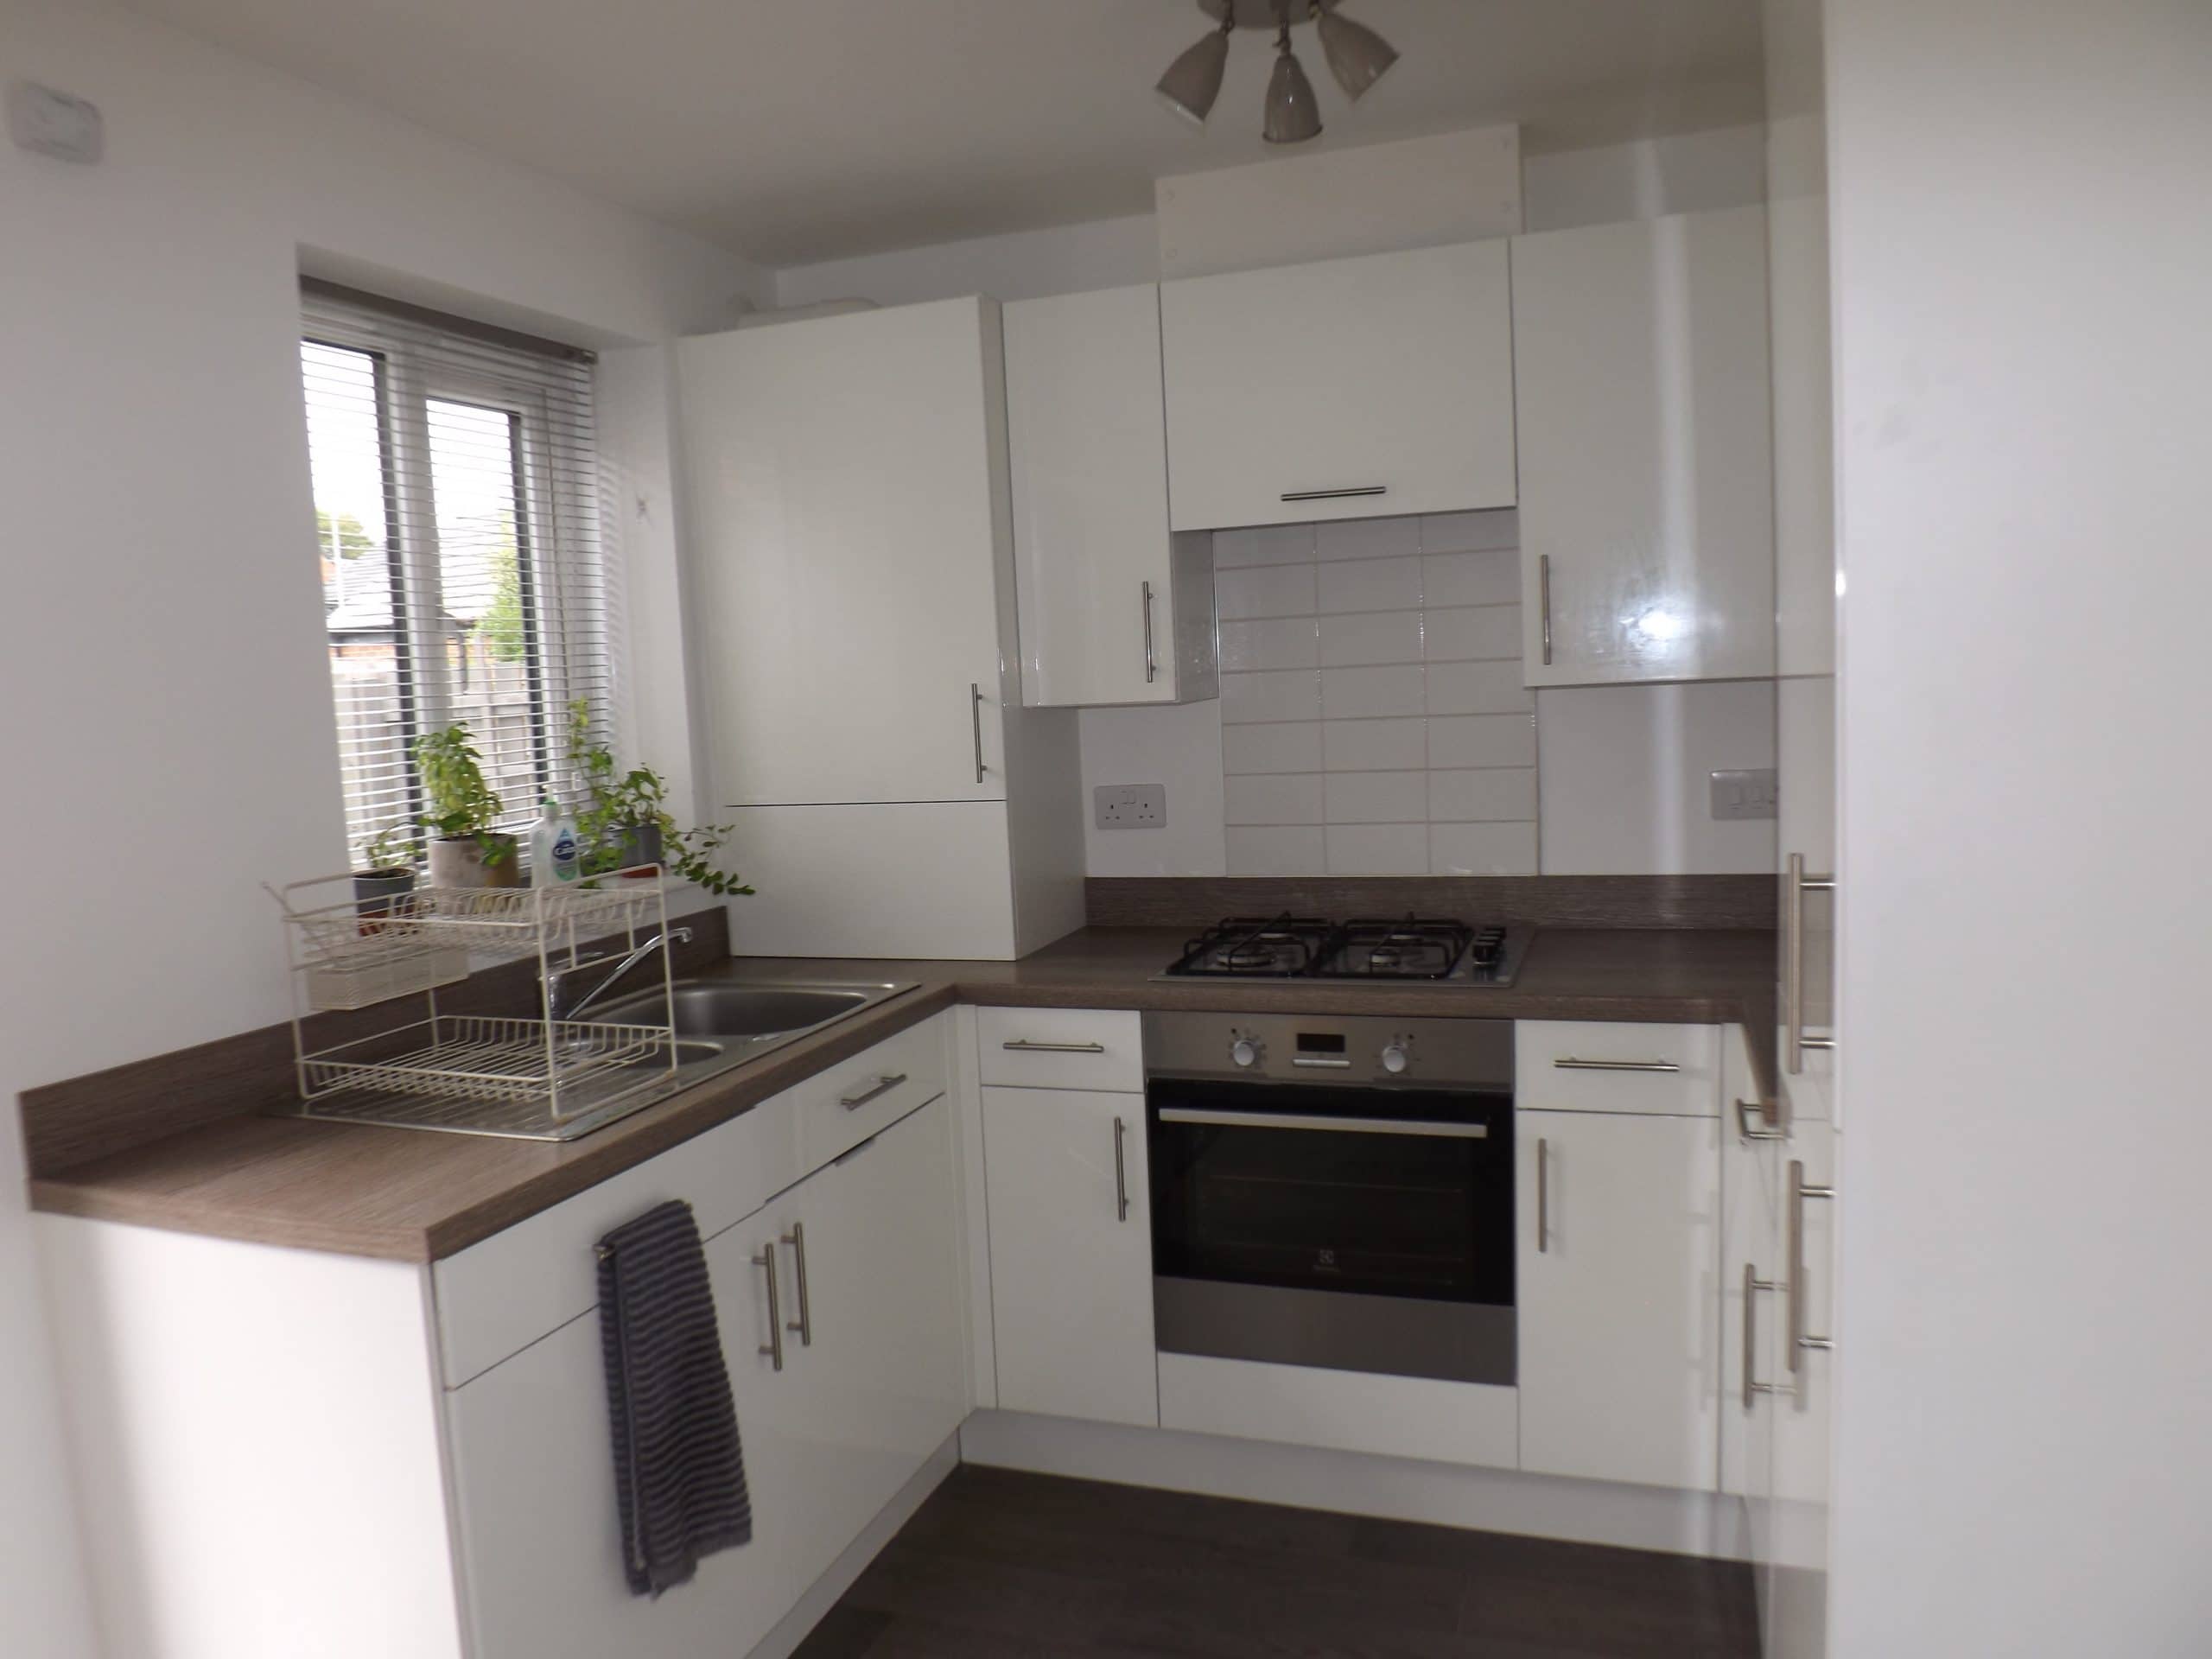 image of kitchen with white paint